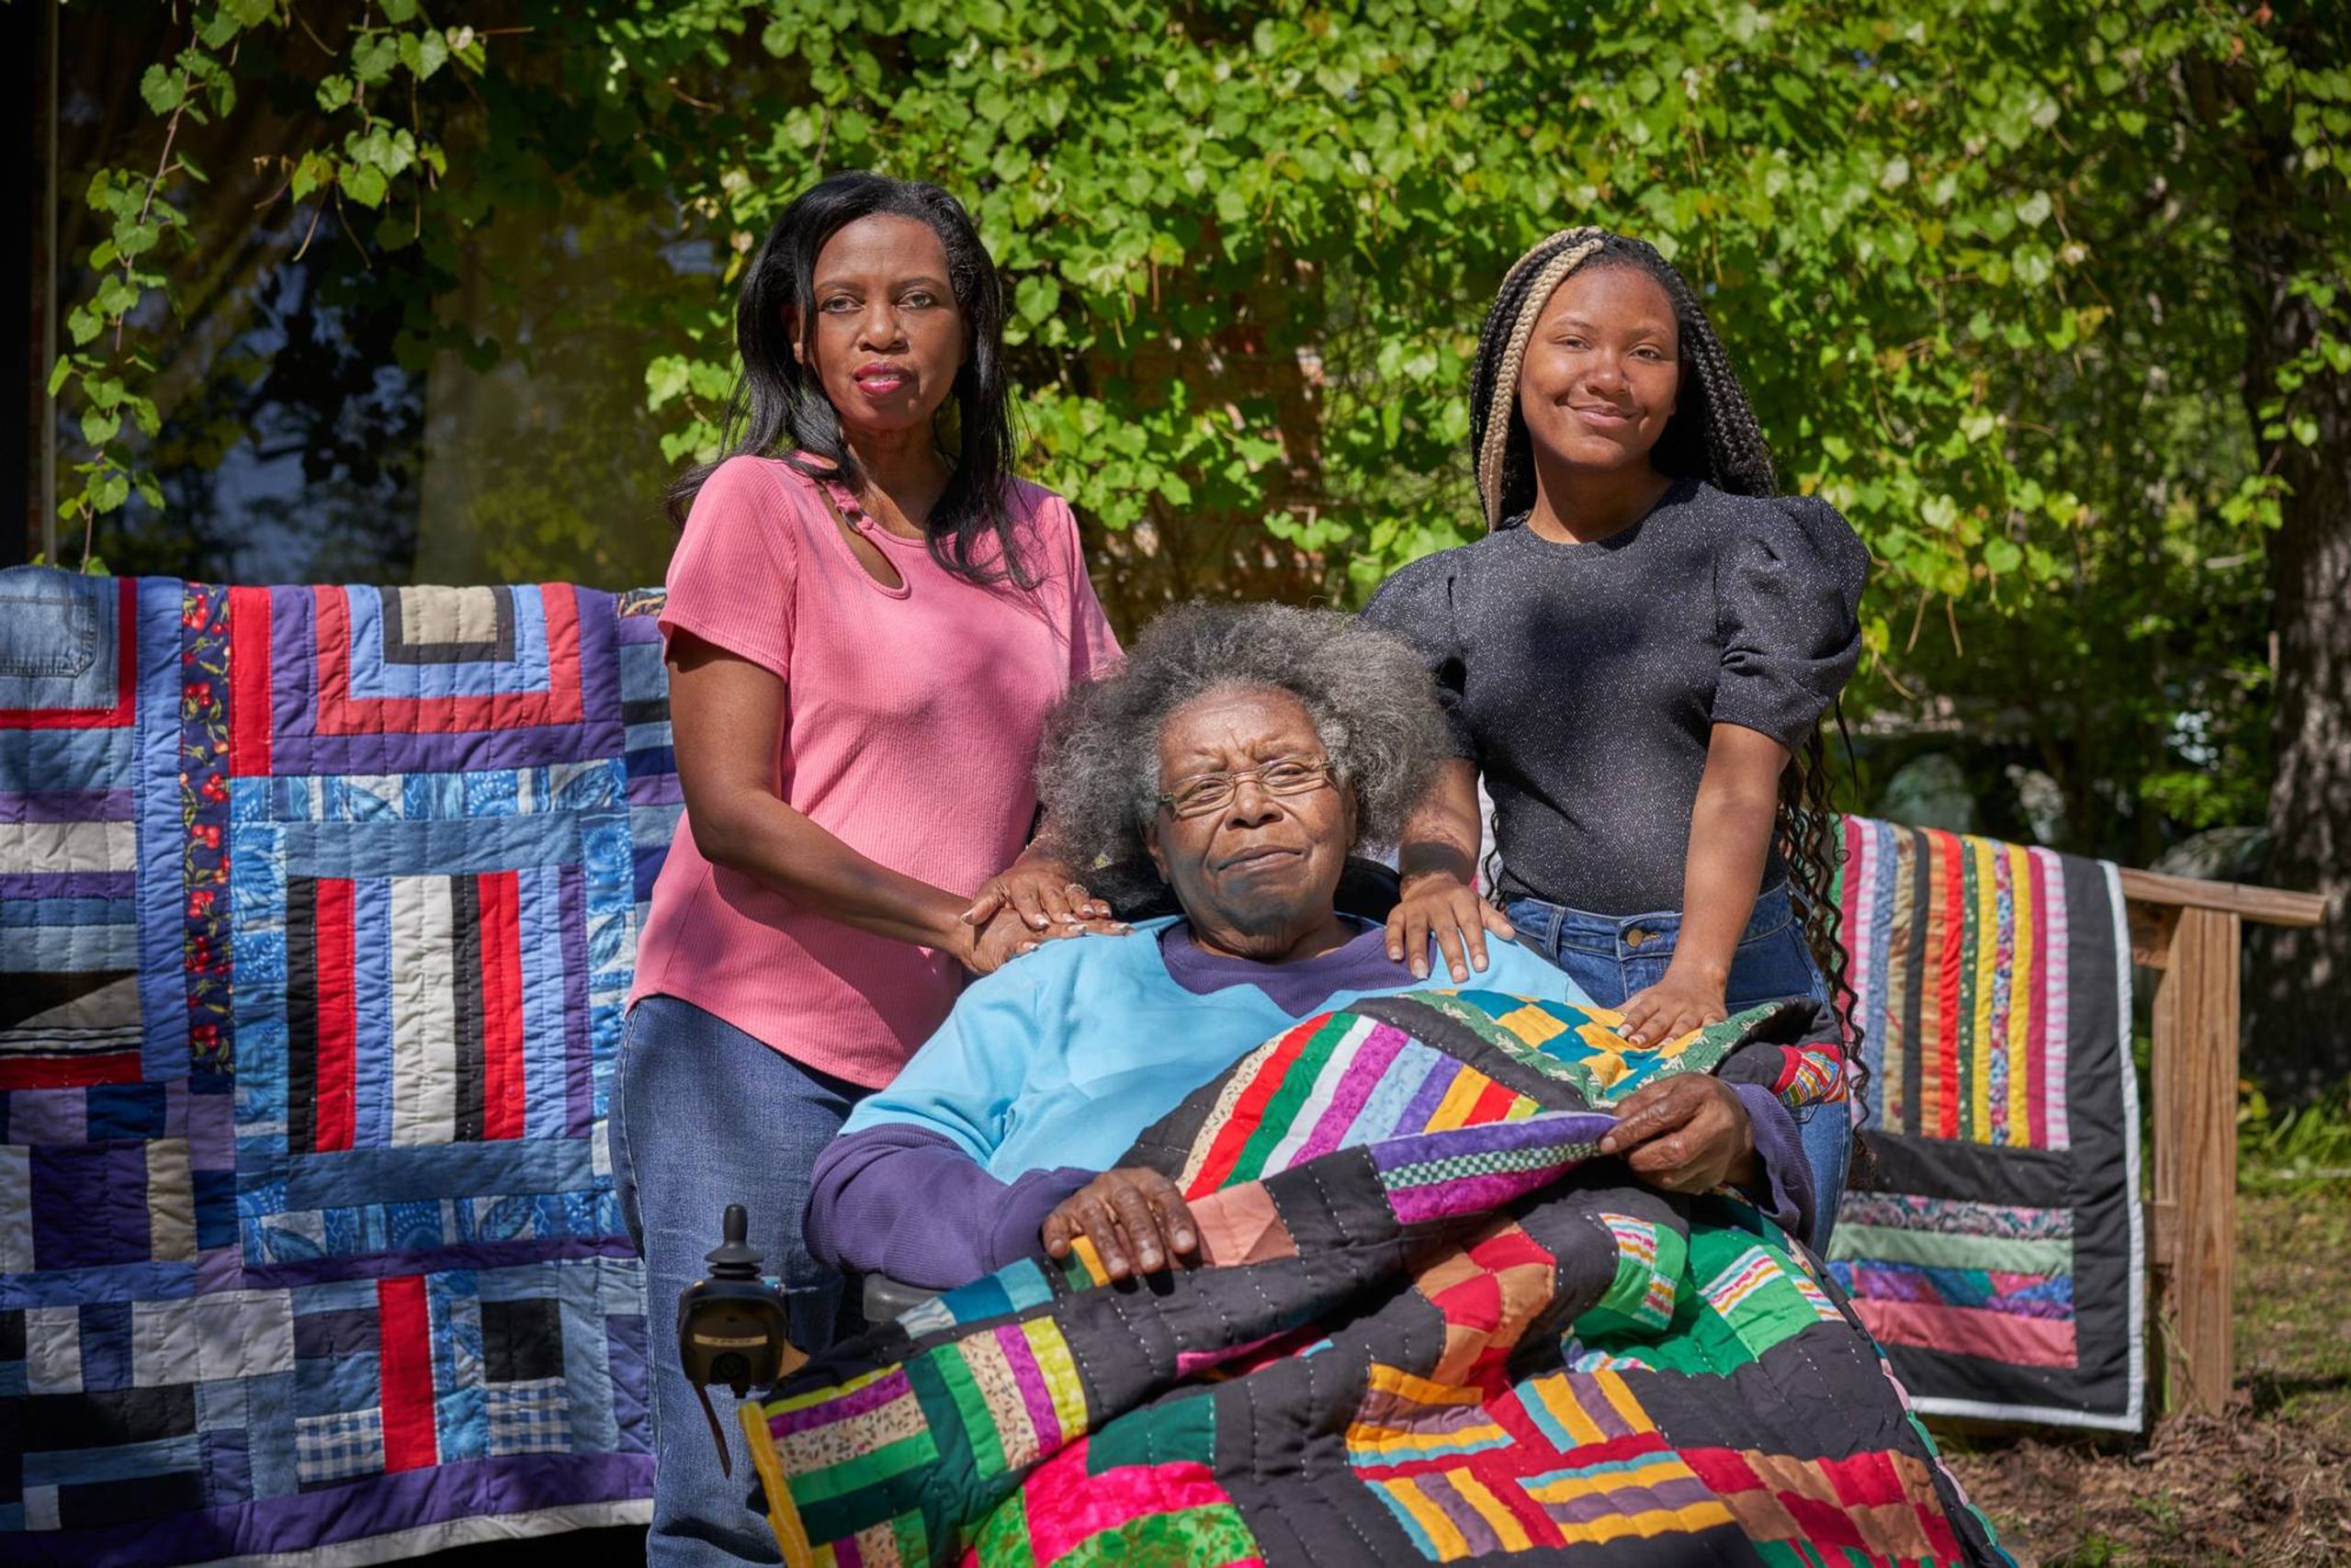 Claudia Pettway Charley (left) Tinnie Pettway (center), and Francesca Charley: Three generations of Gee's Bend quilters